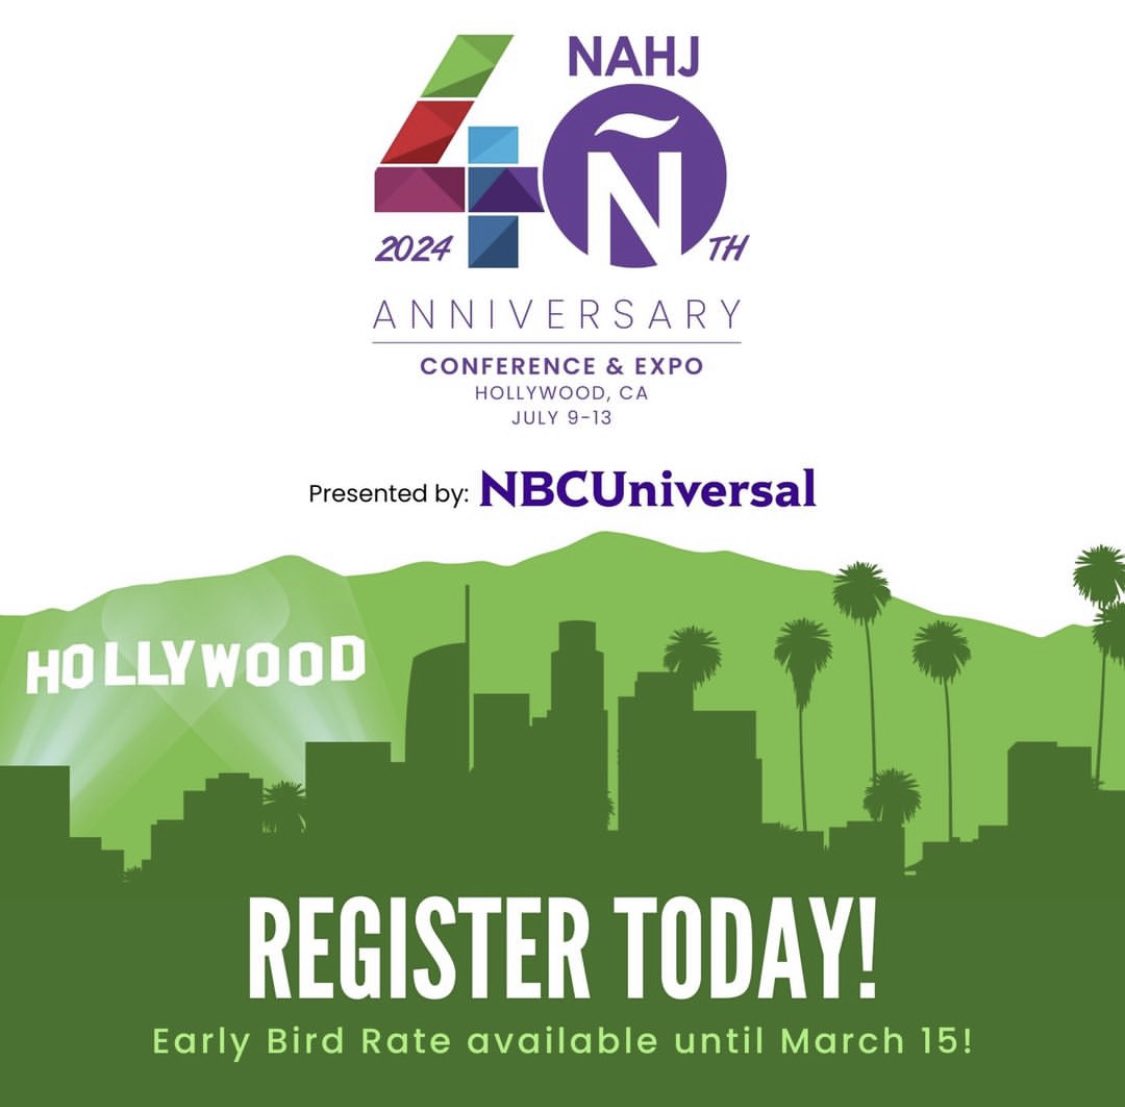 Feliz Martes! Remember that the Early Bird registration for the #NAHJ40th Conference and Expo ends THIS FRIDAY, March 15th! 

To get the discount, go to this link: nahj.memberclicks.net/nahj40th

#MoreLatinosInNews